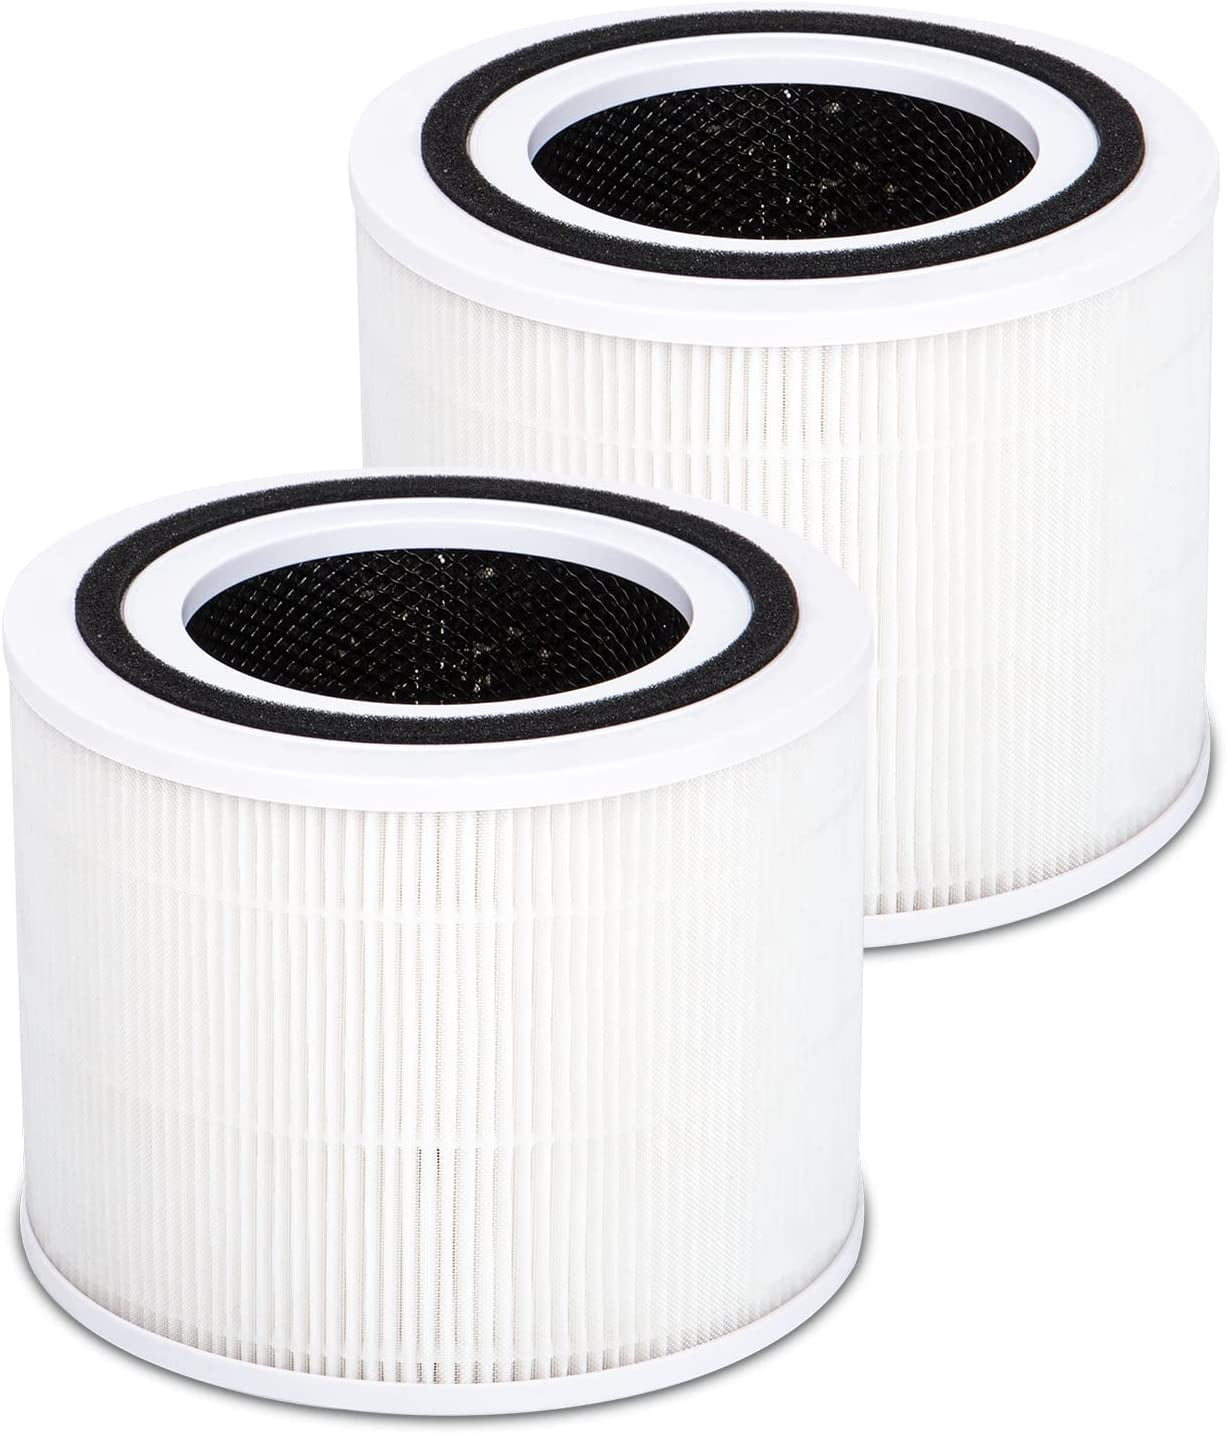  Core 300 Pet Care Replacement Filter for LEVOIT Core 300 Core  300S VortexAir Air Purifier, 3-in-1 HEPA and Activated Carbon, Core  300-RF-PA, 2 Pack, Yellow : Home & Kitchen